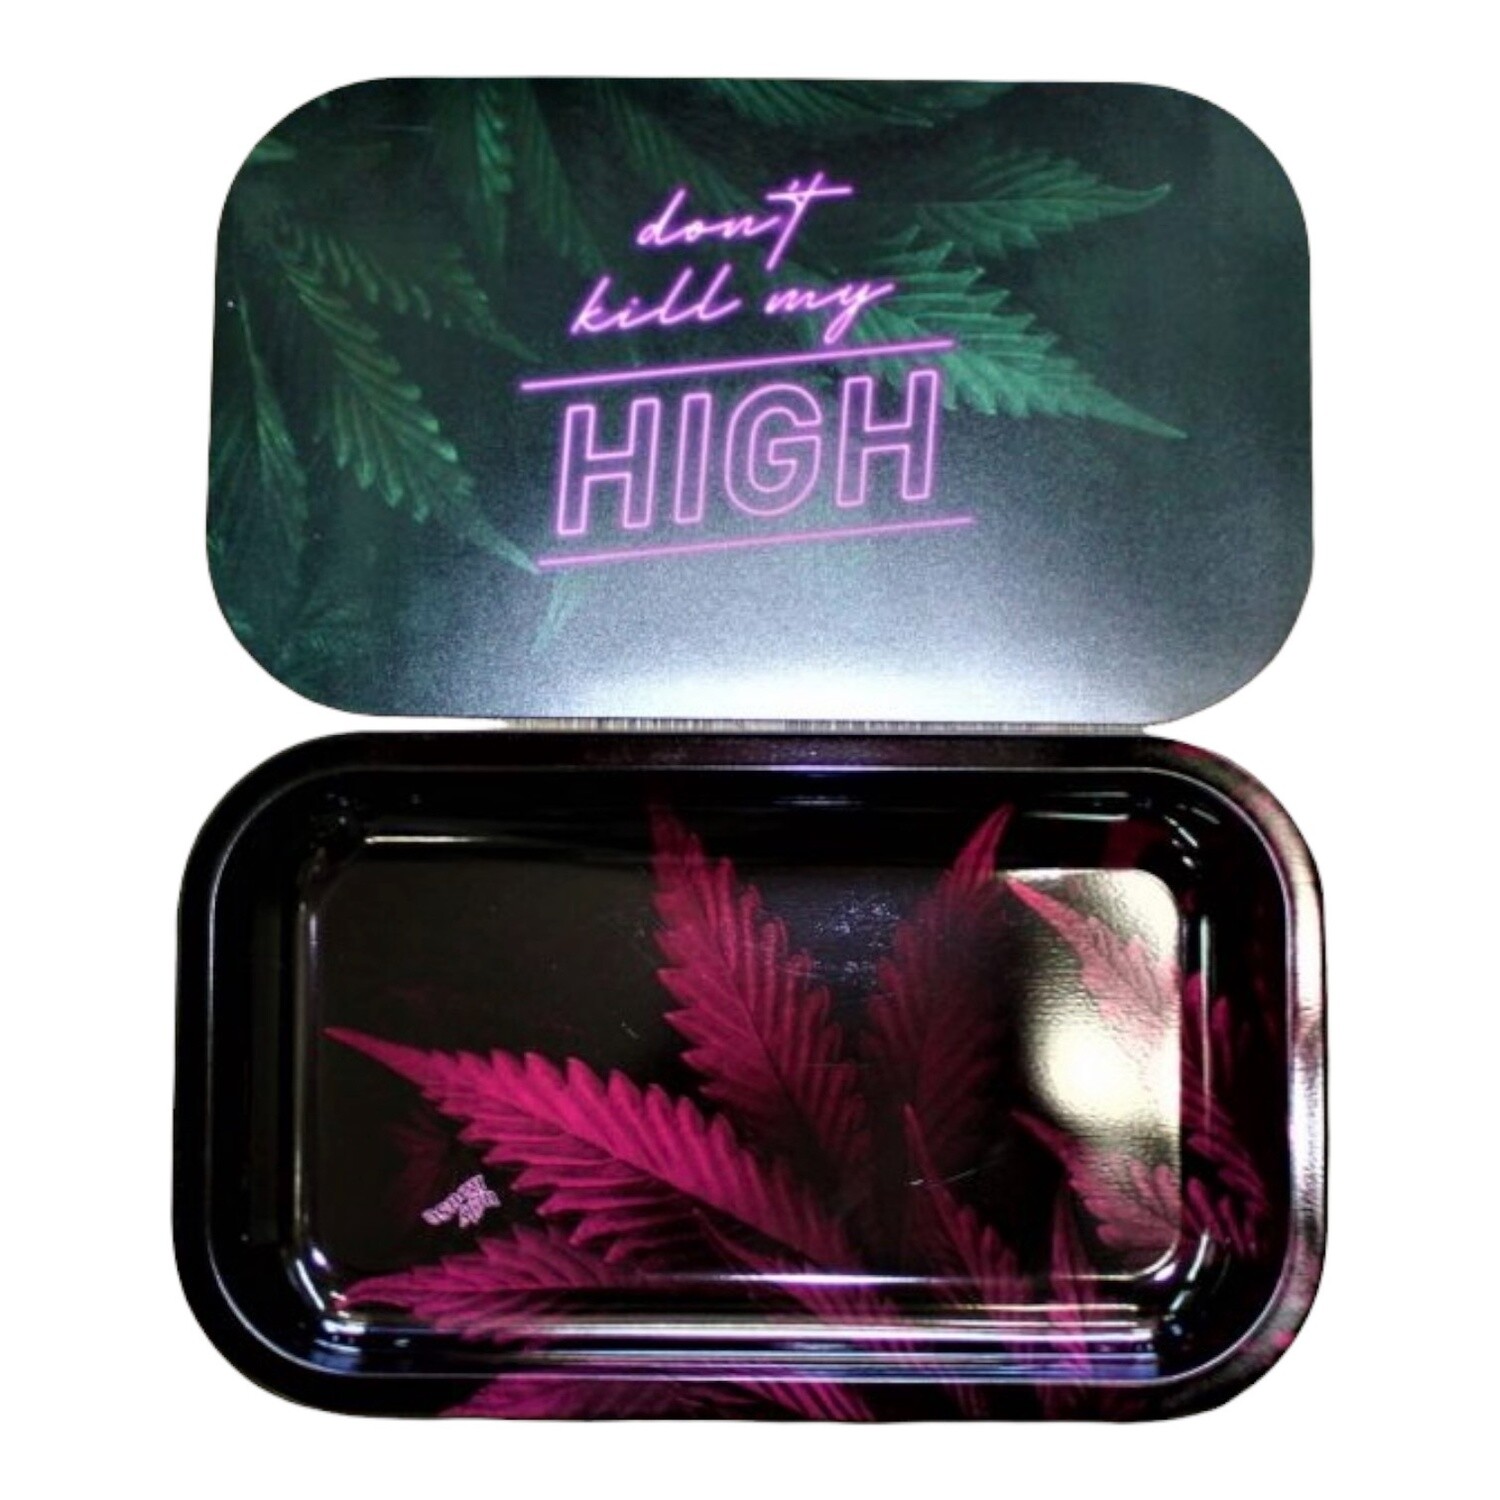 UGLY HOUSE COLOR CHANGING LIGHT UP ROLLING TRAY DONT KILL ME HIGH